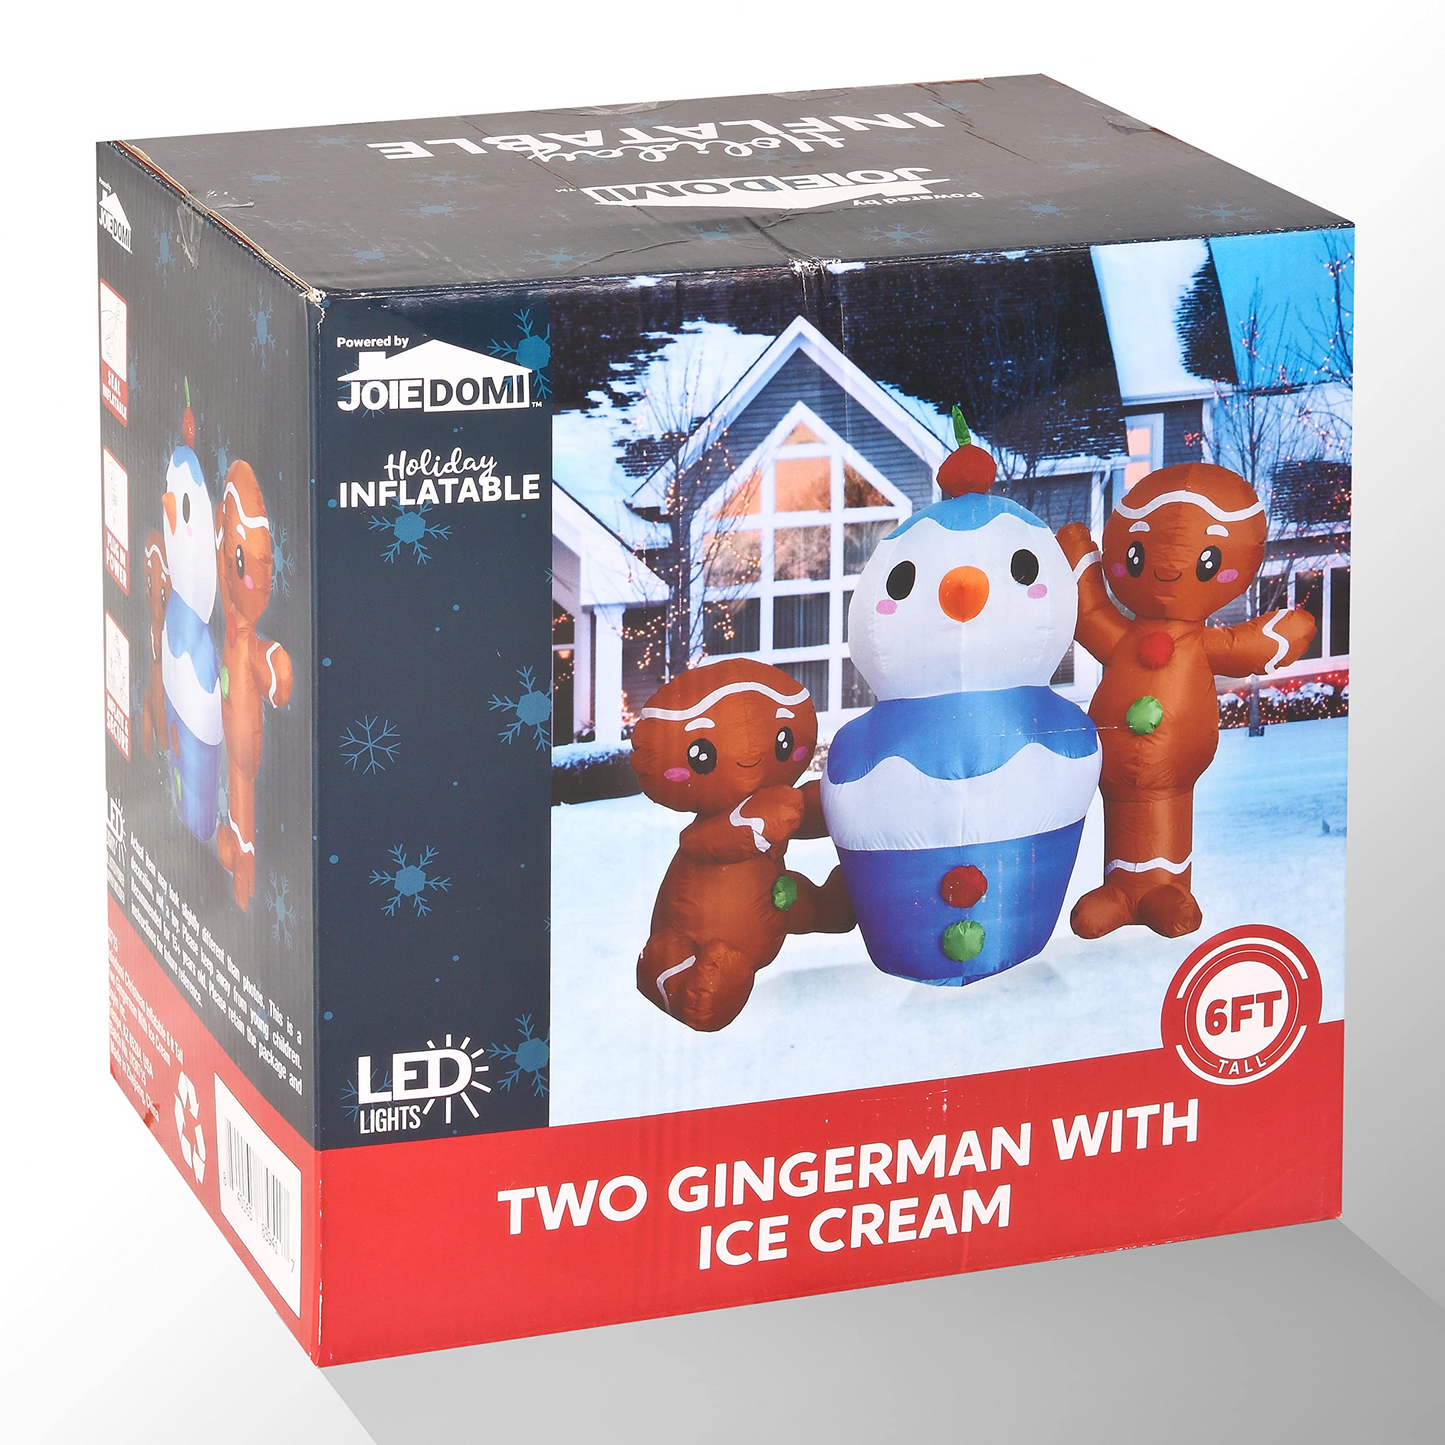 6ft Two Gingerman with Ice Cream Inflatable